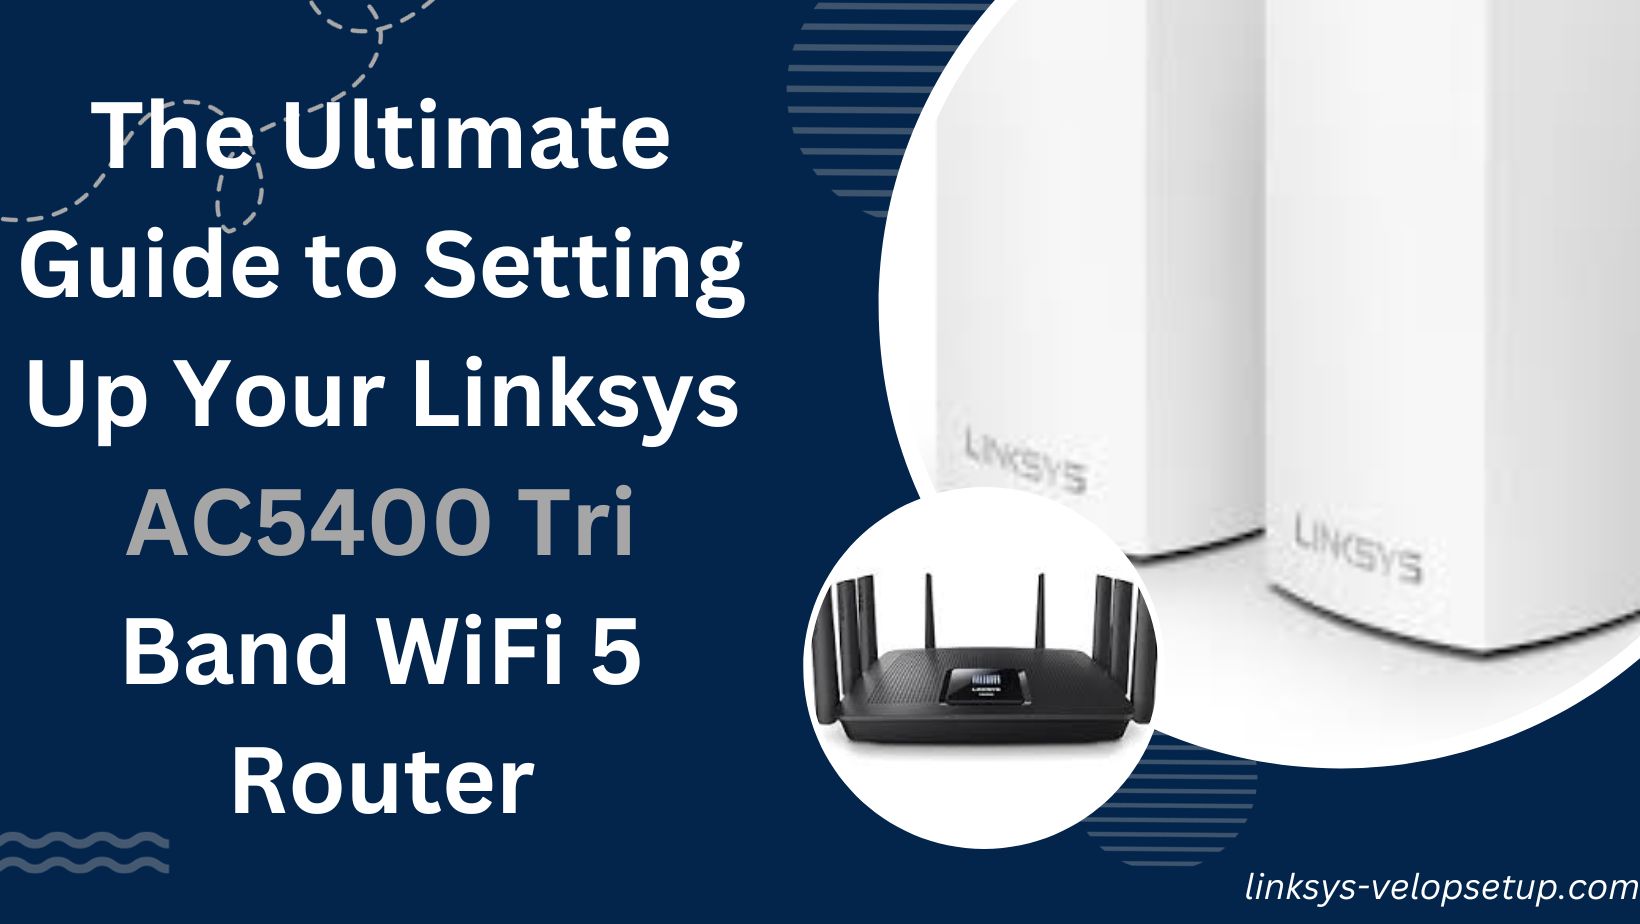 You are currently viewing The Ultimate Guide to Setting Up Your Linksys AC5400 Tri Band WiFi 5 Router